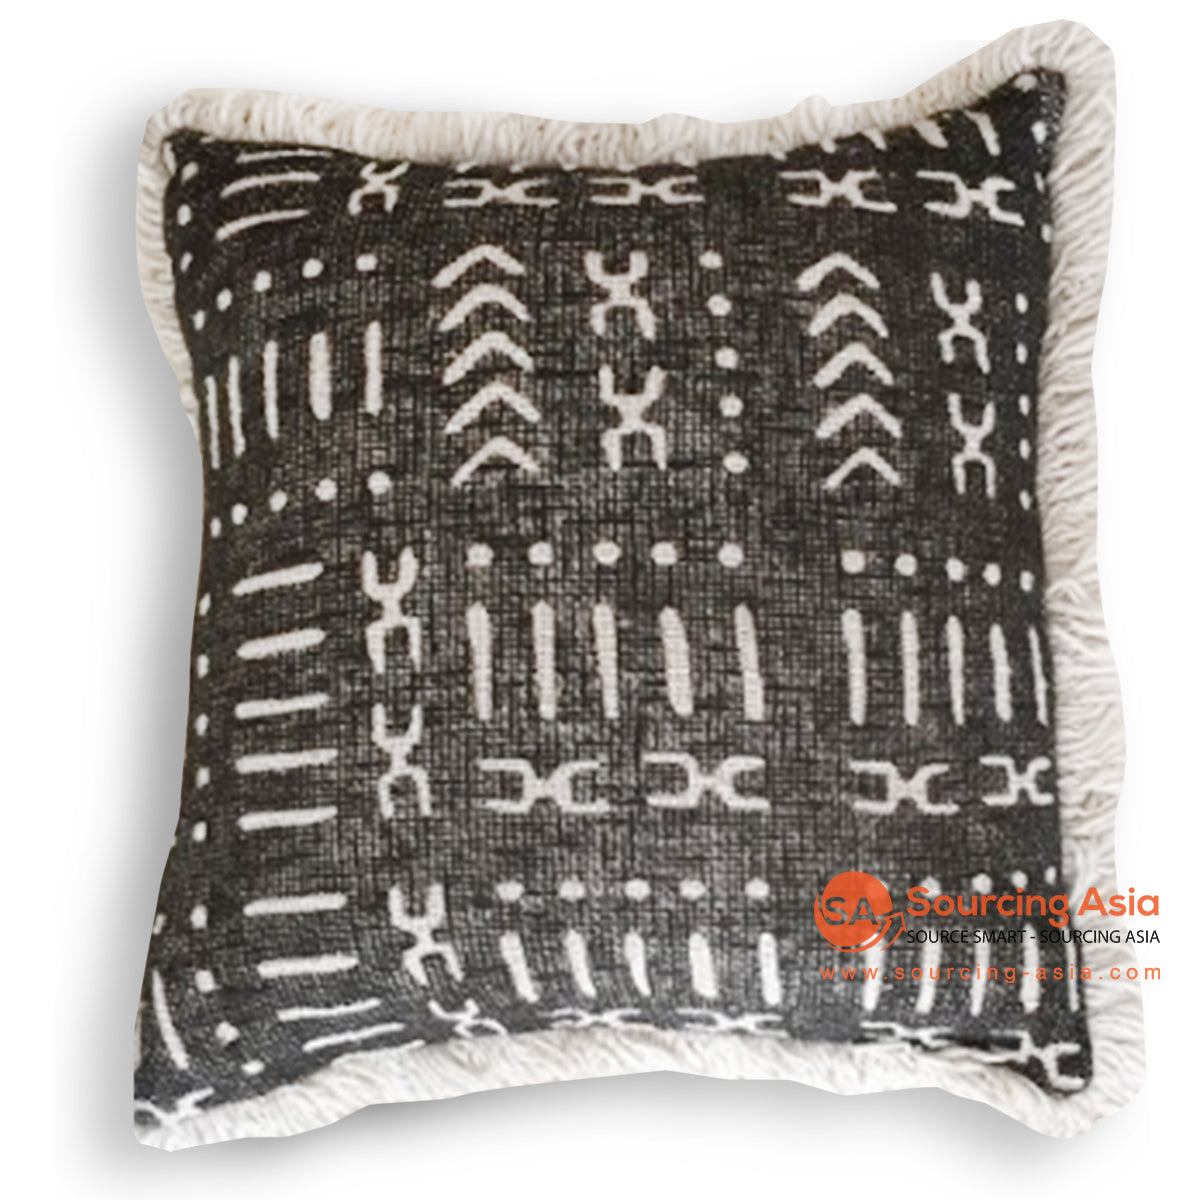 HIP027 BLACK FABRIC SCREEN PRINTED SQUARE CUSHION WITH EMBROIDERY AND FRINGE (PRICE WITHOUT INNER)